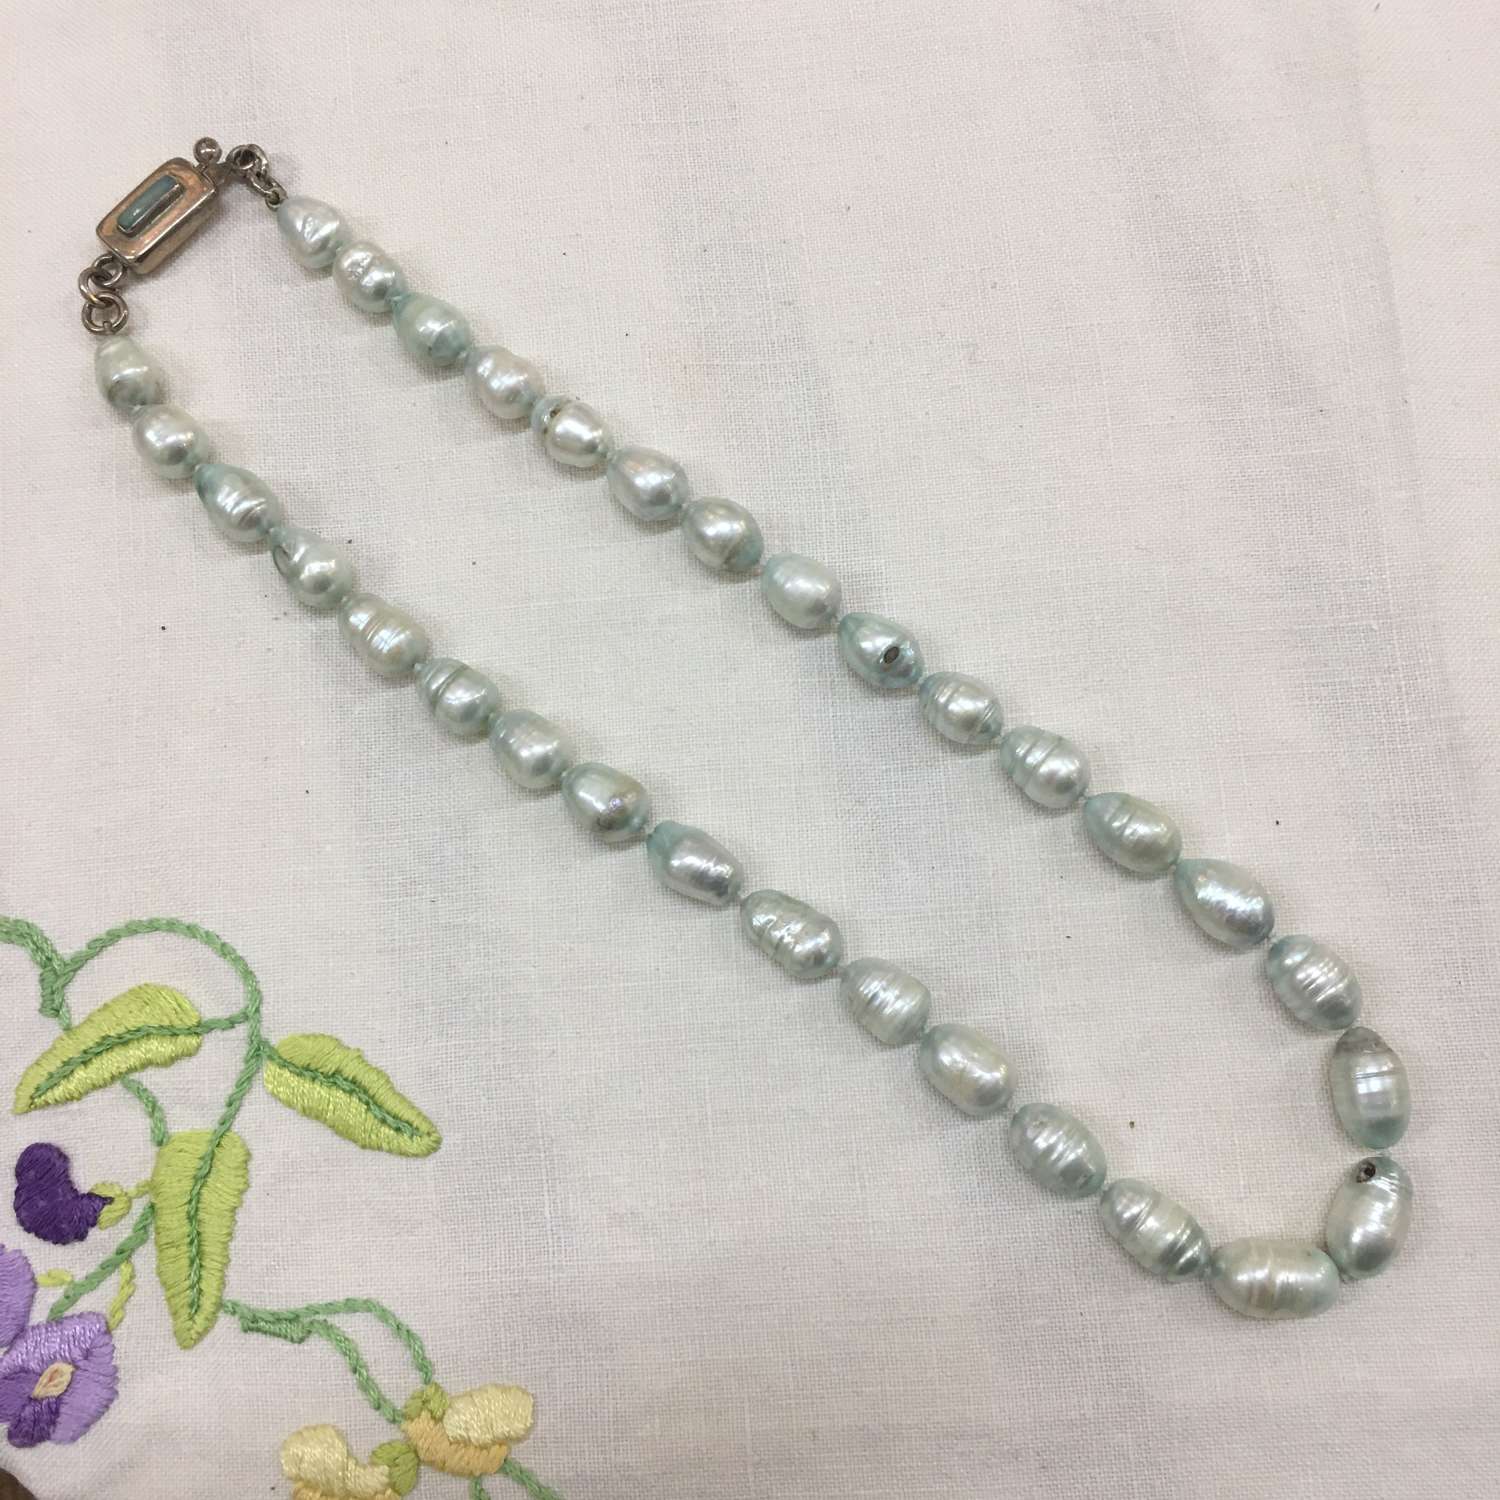 Aqua freshwater pearl necklace 49cm with silver clasp Inset with aqua